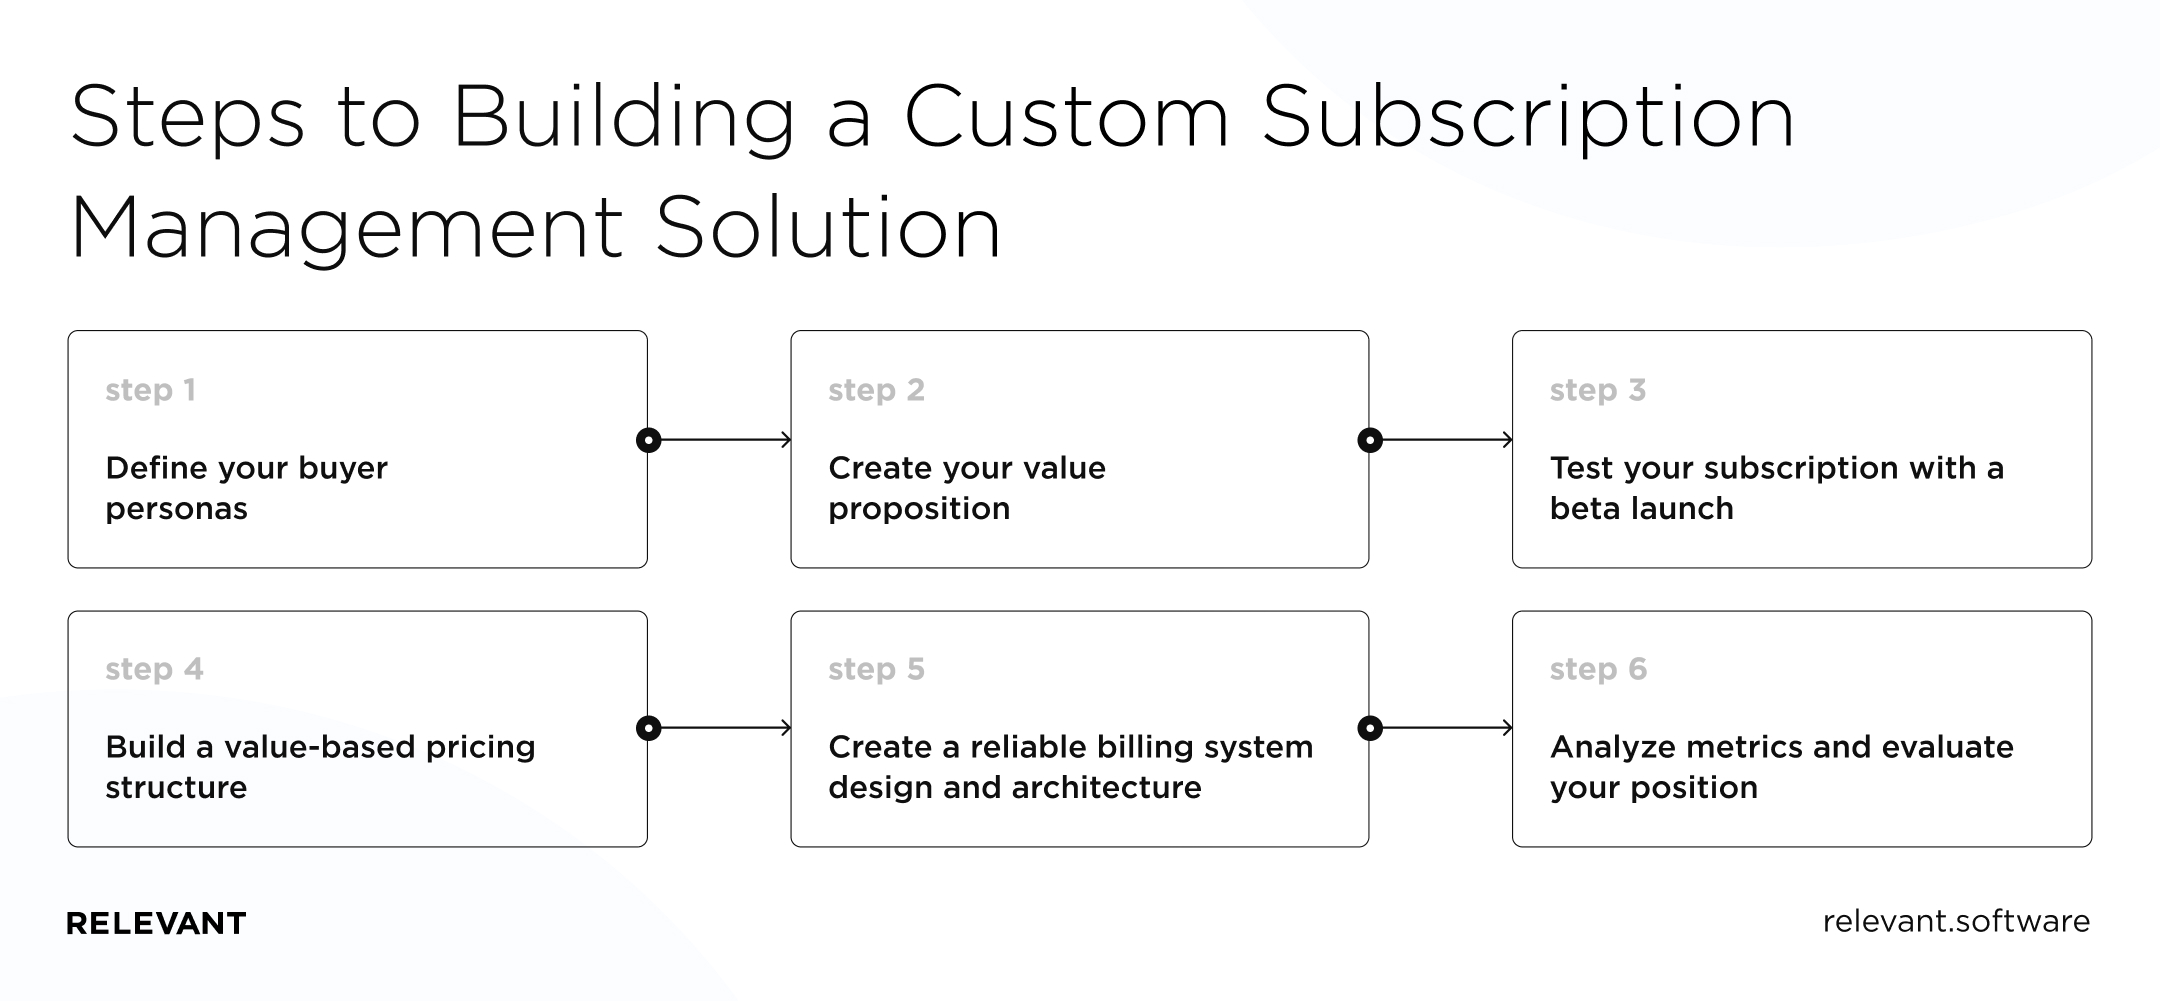 Steps to building a custom subscription management solution